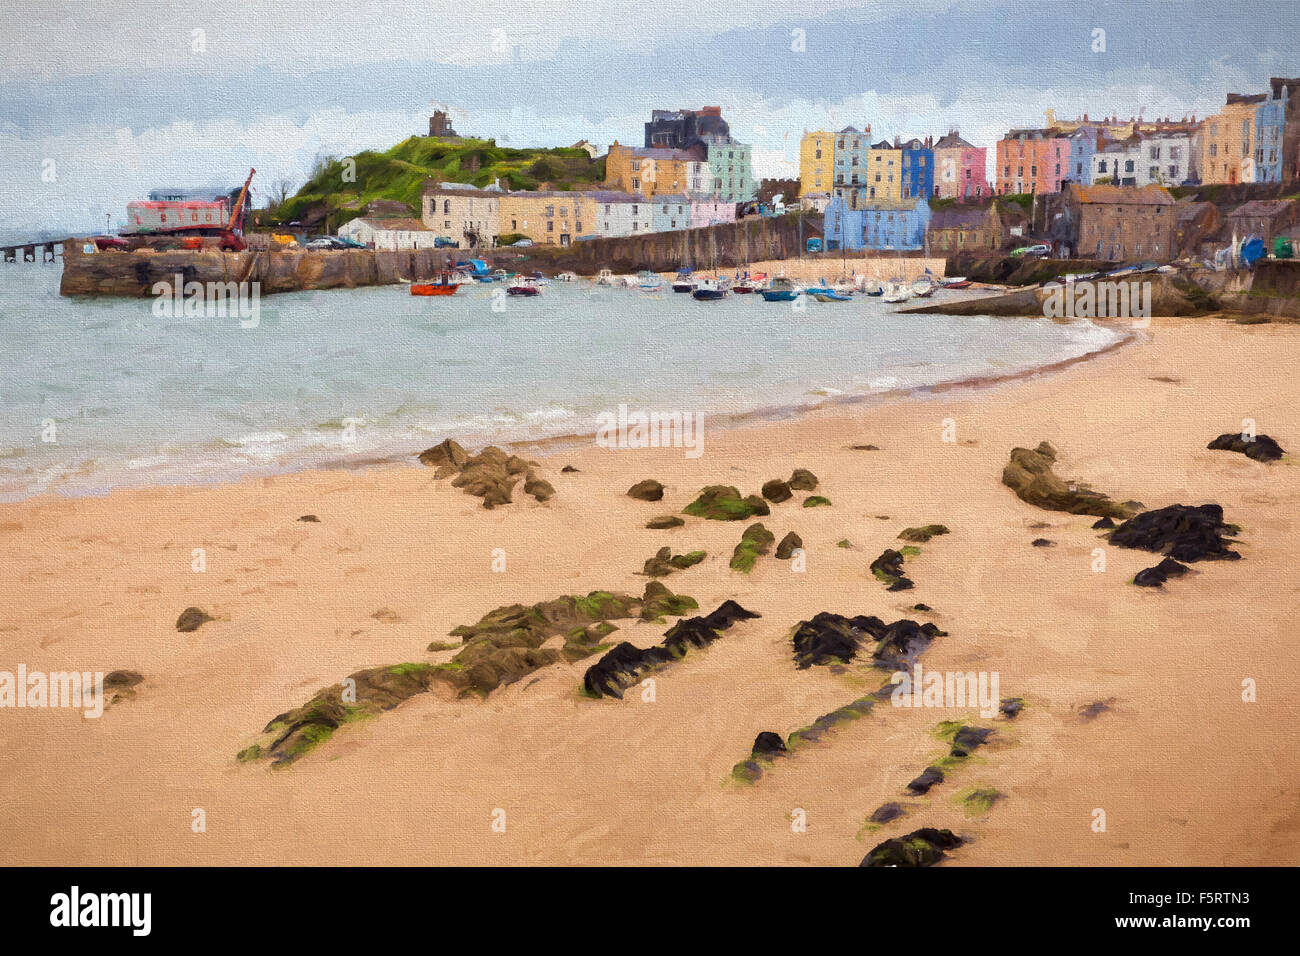 Tenby beach and town Pembrokeshire Wales uk illustration like oil painting Stock Photo